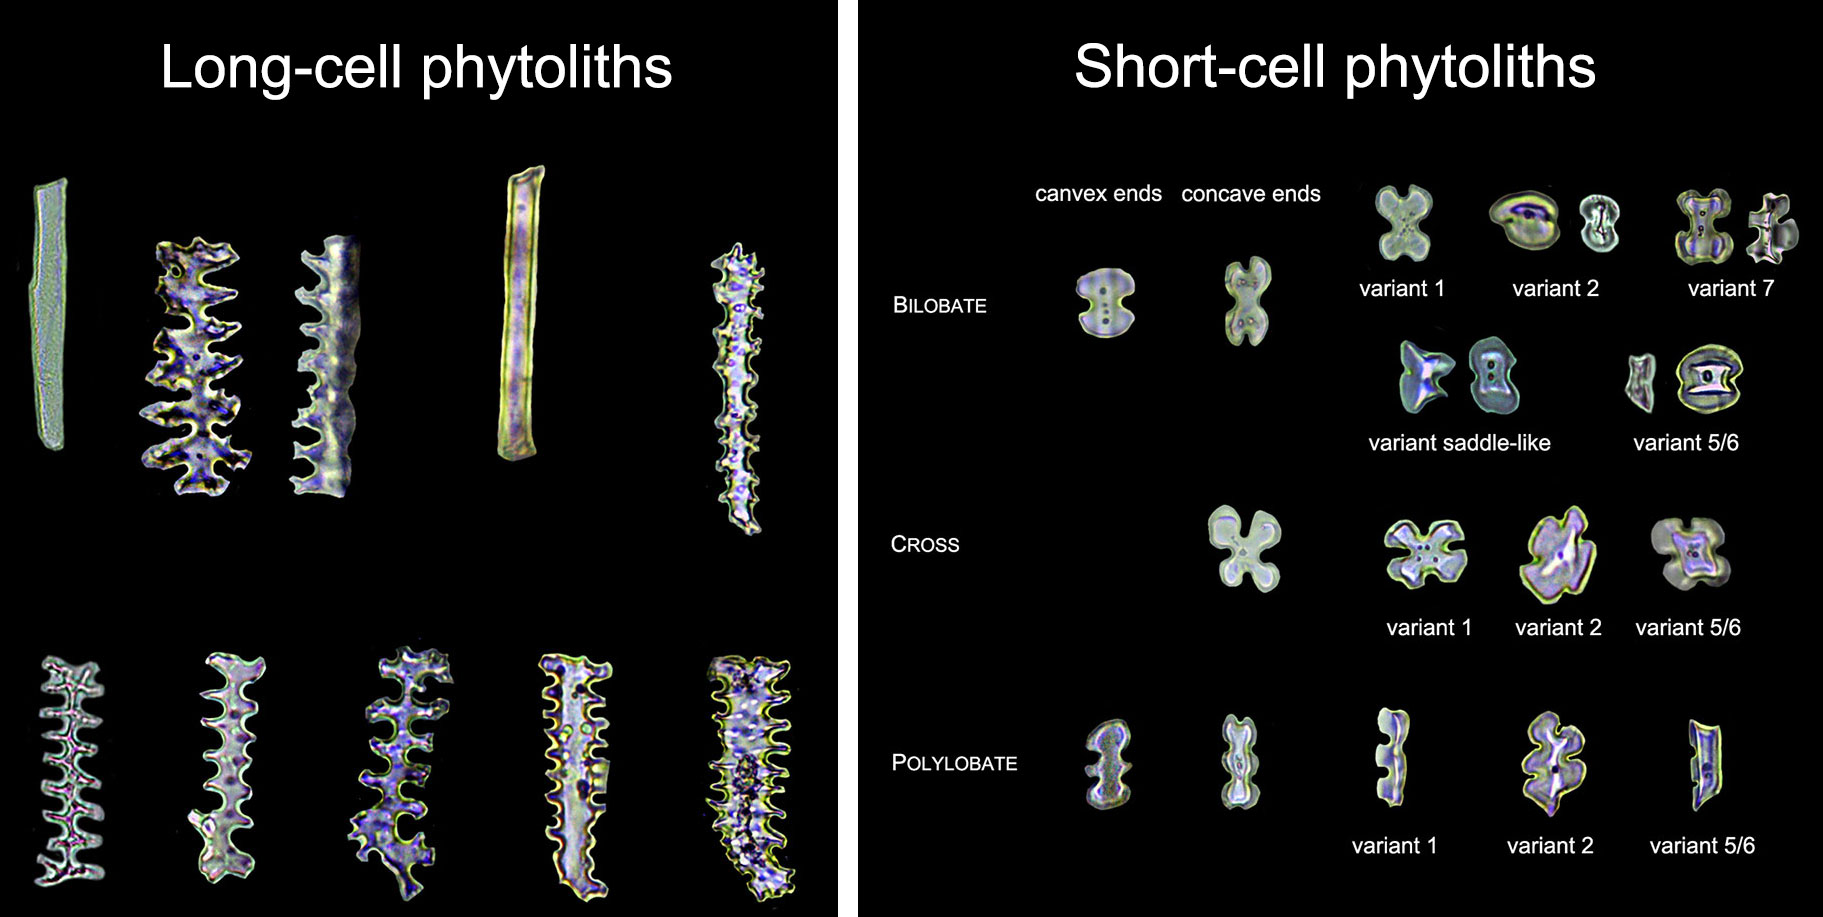 2-Panel image showing photo illustrations of different types of phytoliths from grass bracts. Panel 1. A selection of long-cell phytoliths. These phytoliths are elongated with straight or sinuous long walls. Panel 2. A selections of shrot-cell phytoliths, including bilobate, cross-shaped, and polylobate types.